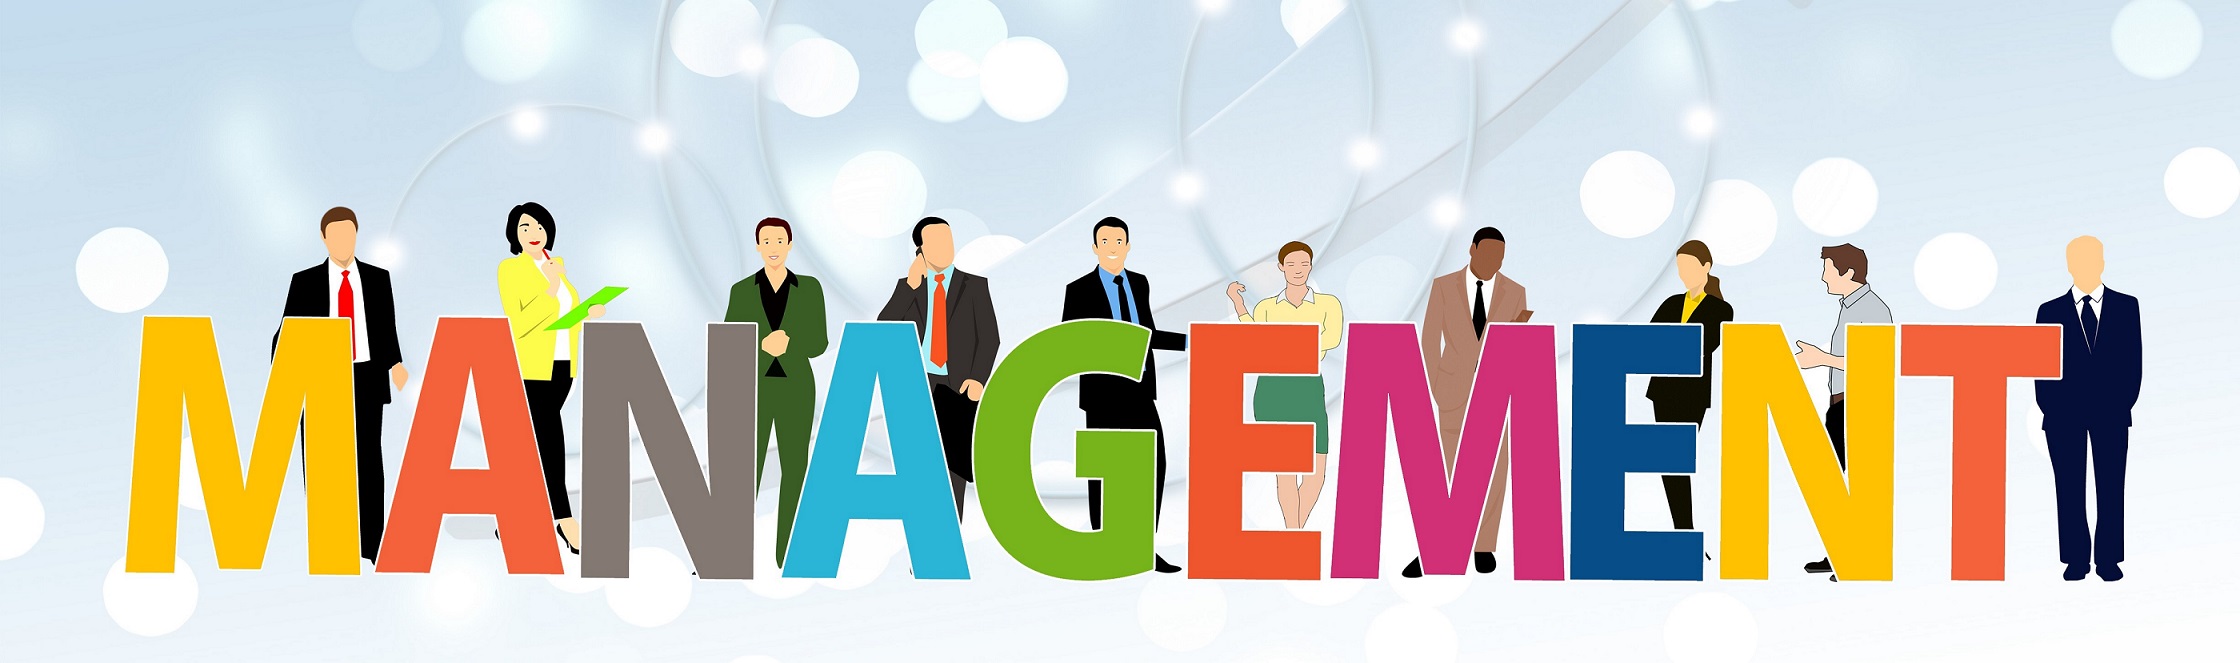 Middle Managers' Role as Change Agents | NHH